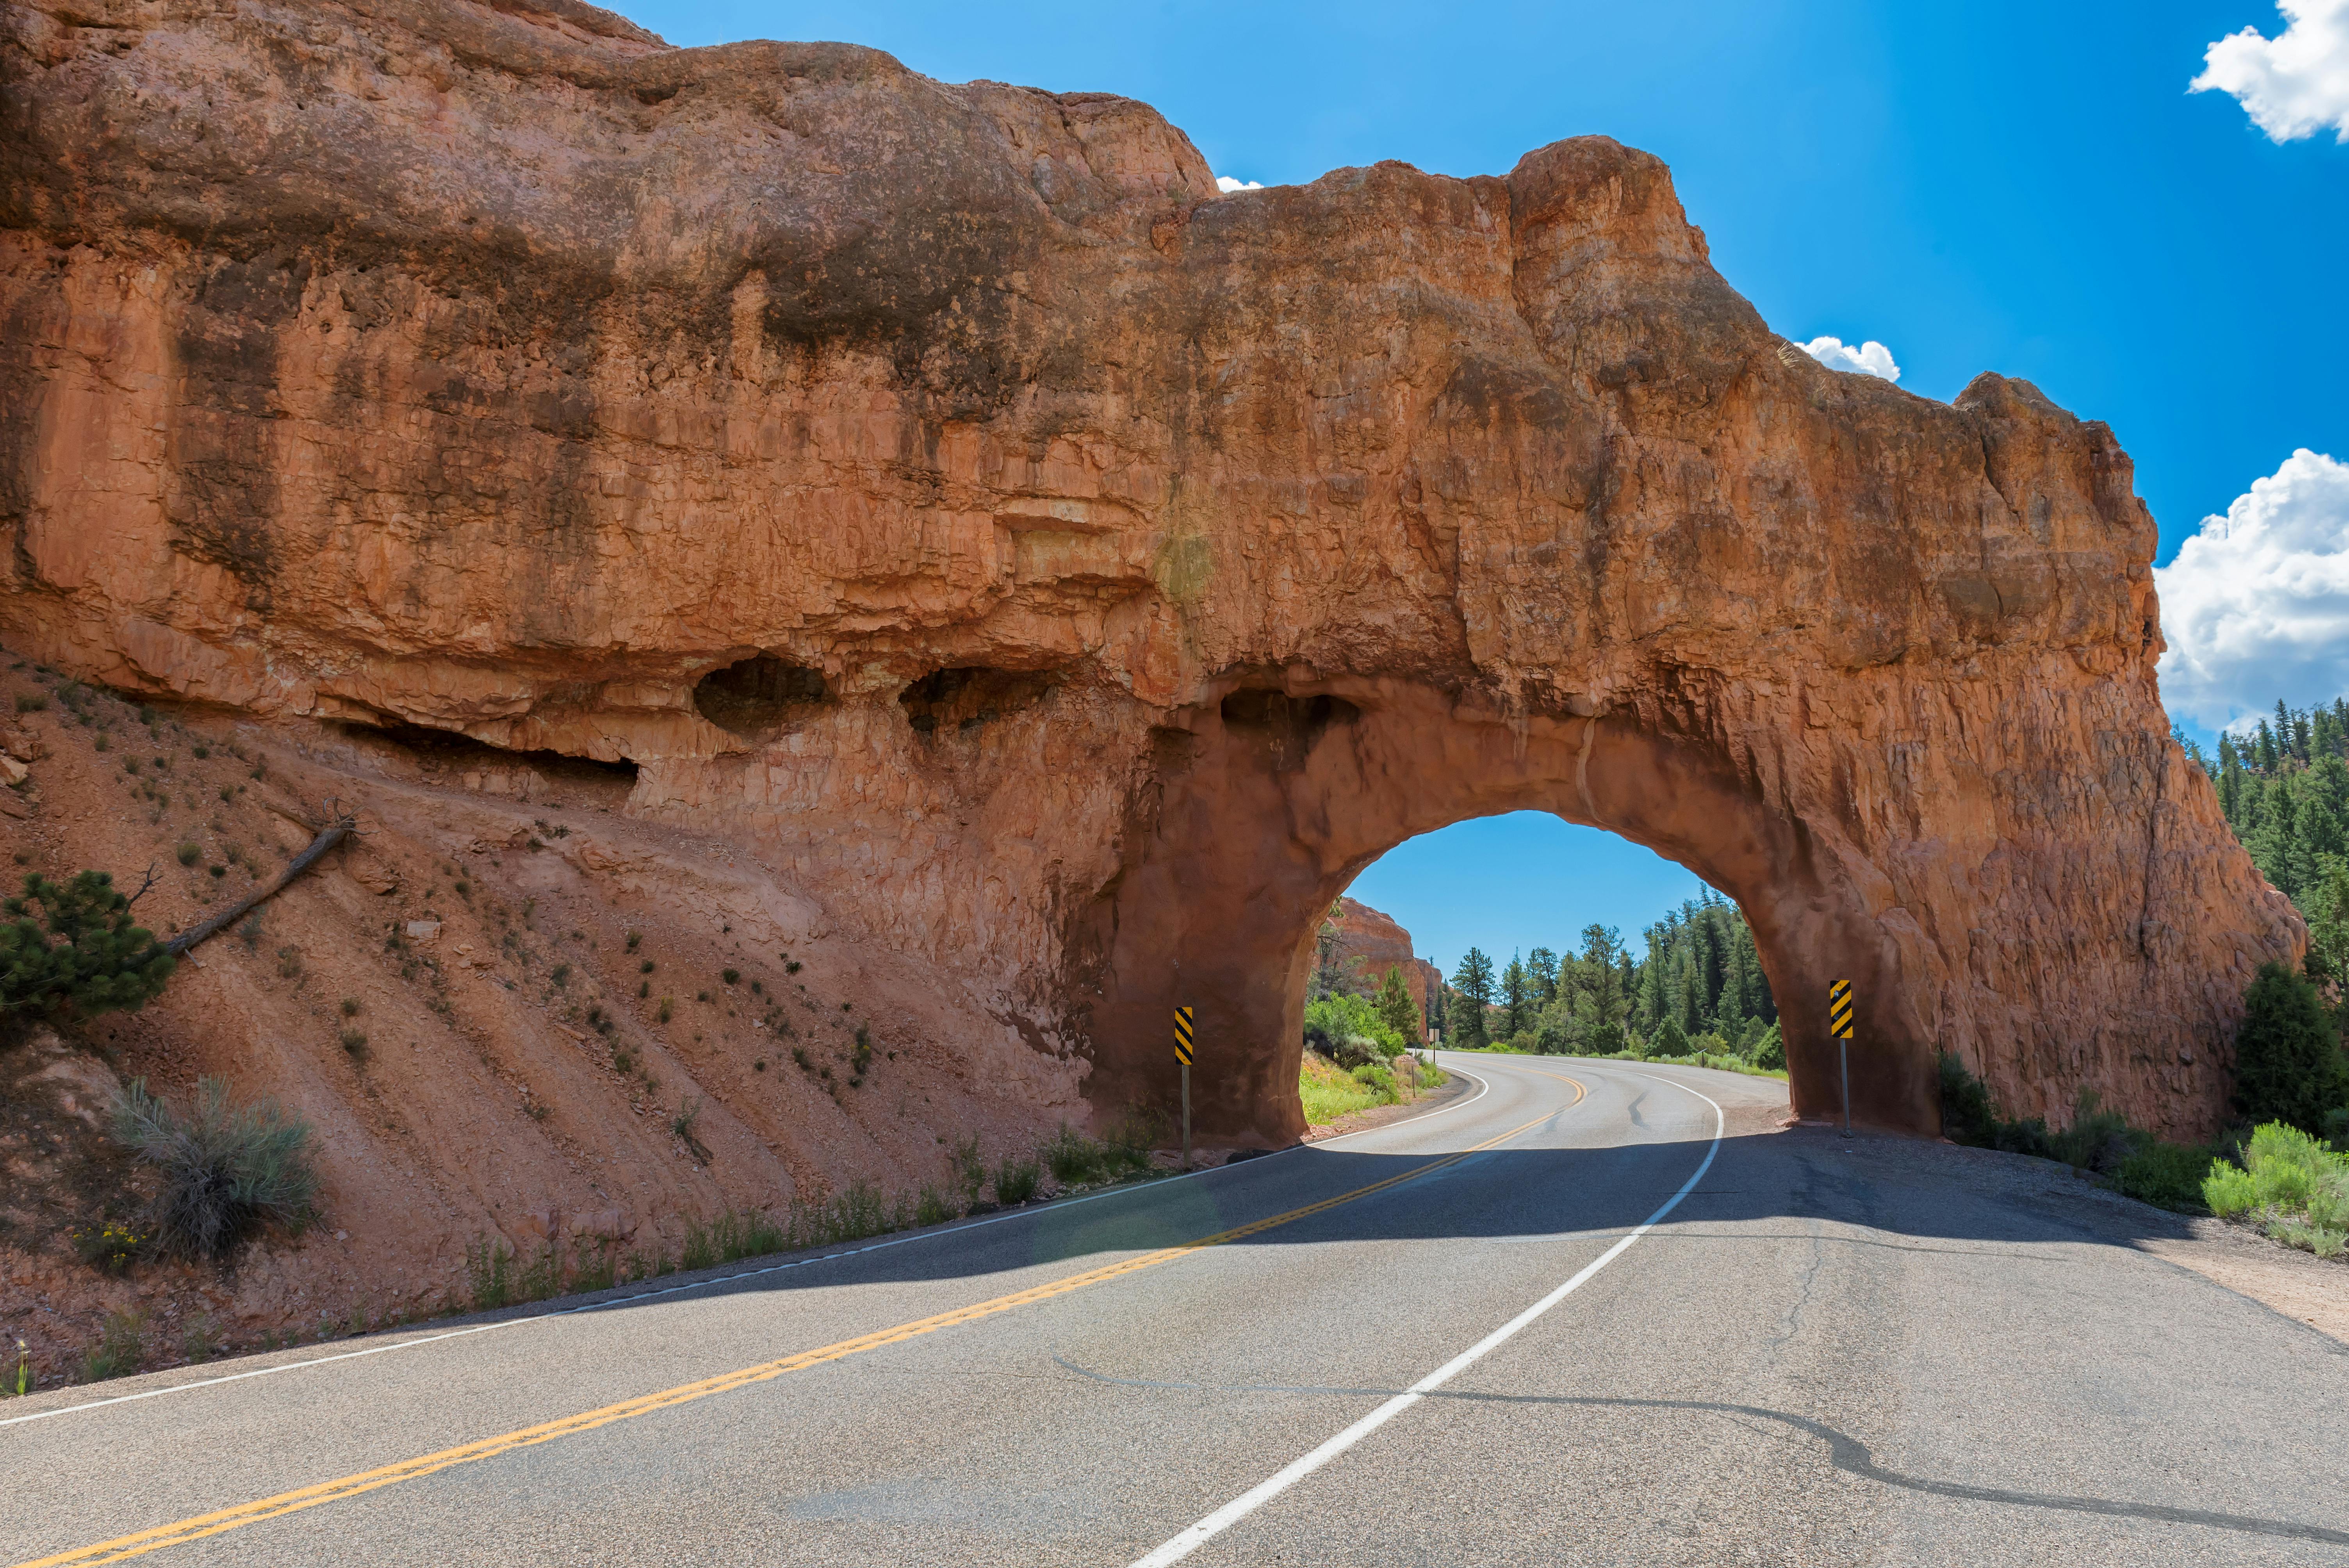 Riding on a scenic route through an arch in a Utah National Park